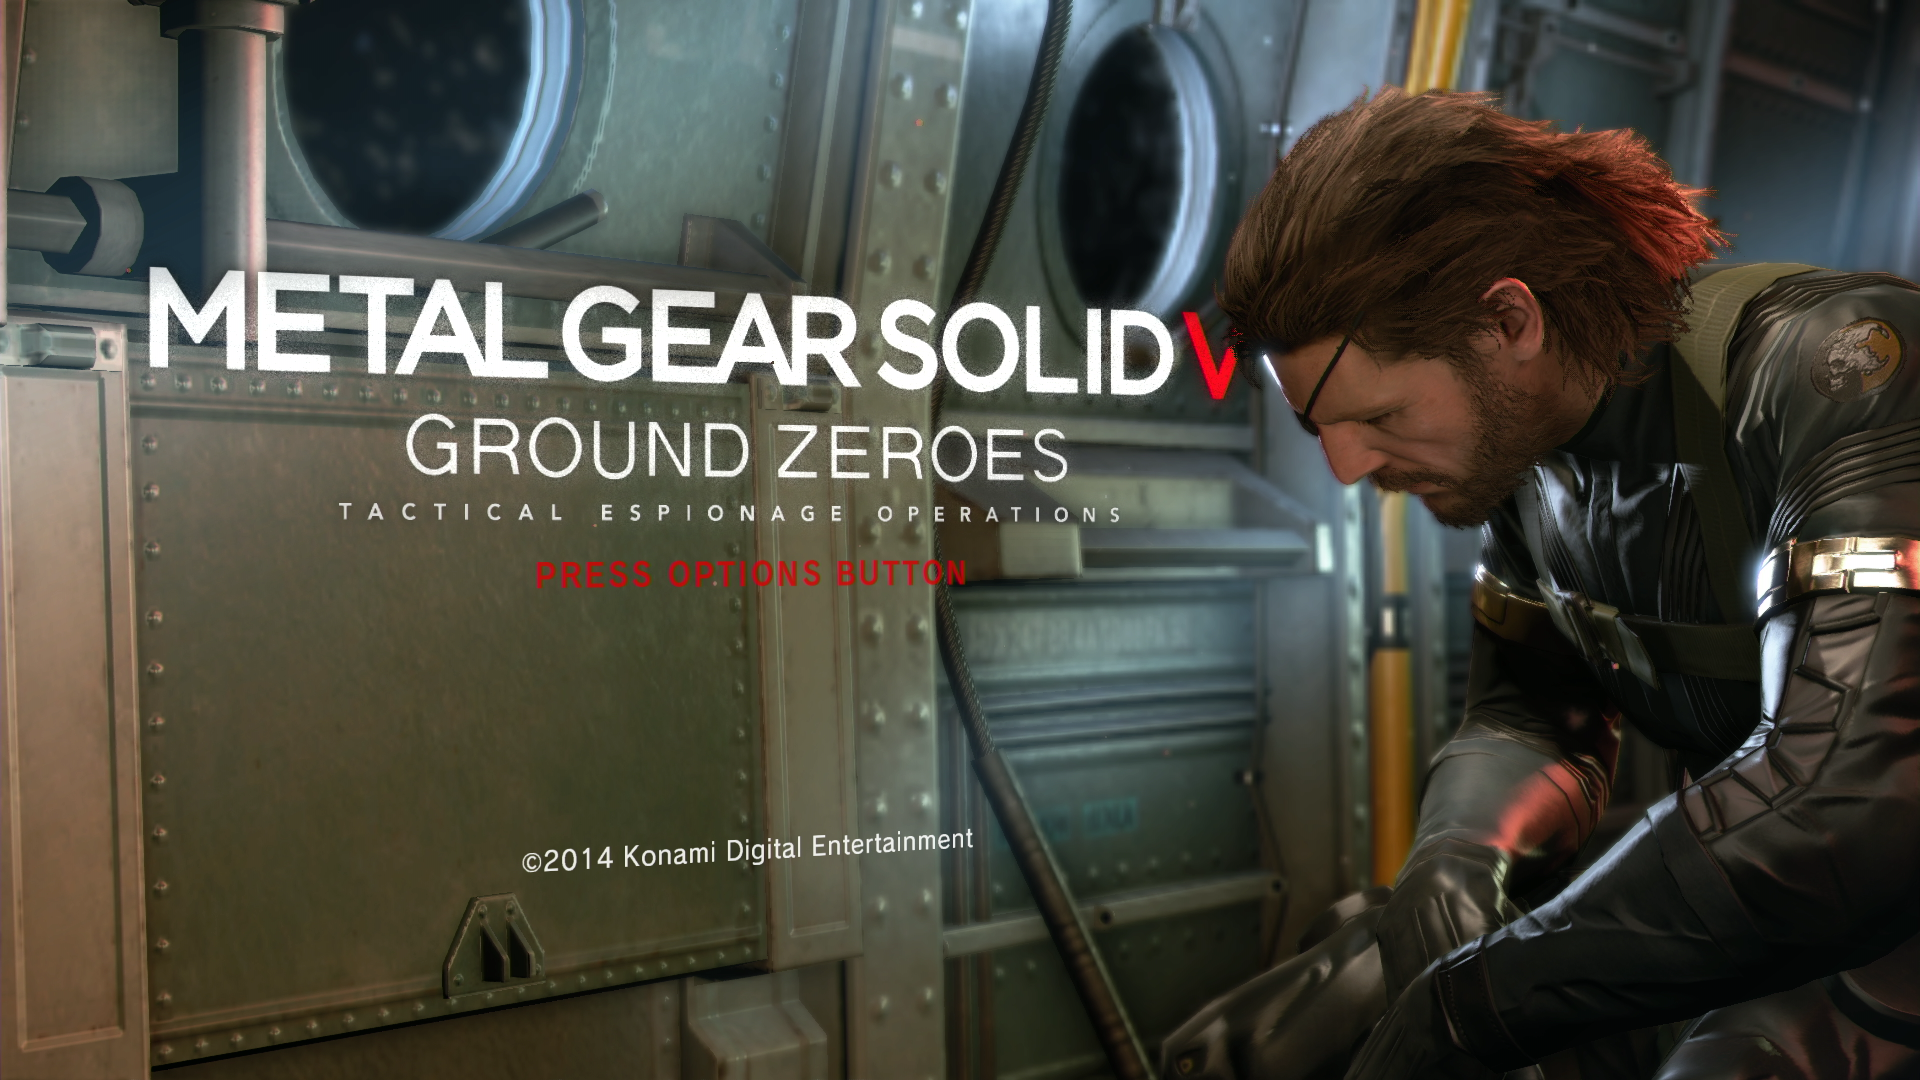 Metal Gear Solid V Ground Zeroes 豪華な前菜と それがもたらす 幻肢痛 Automaton